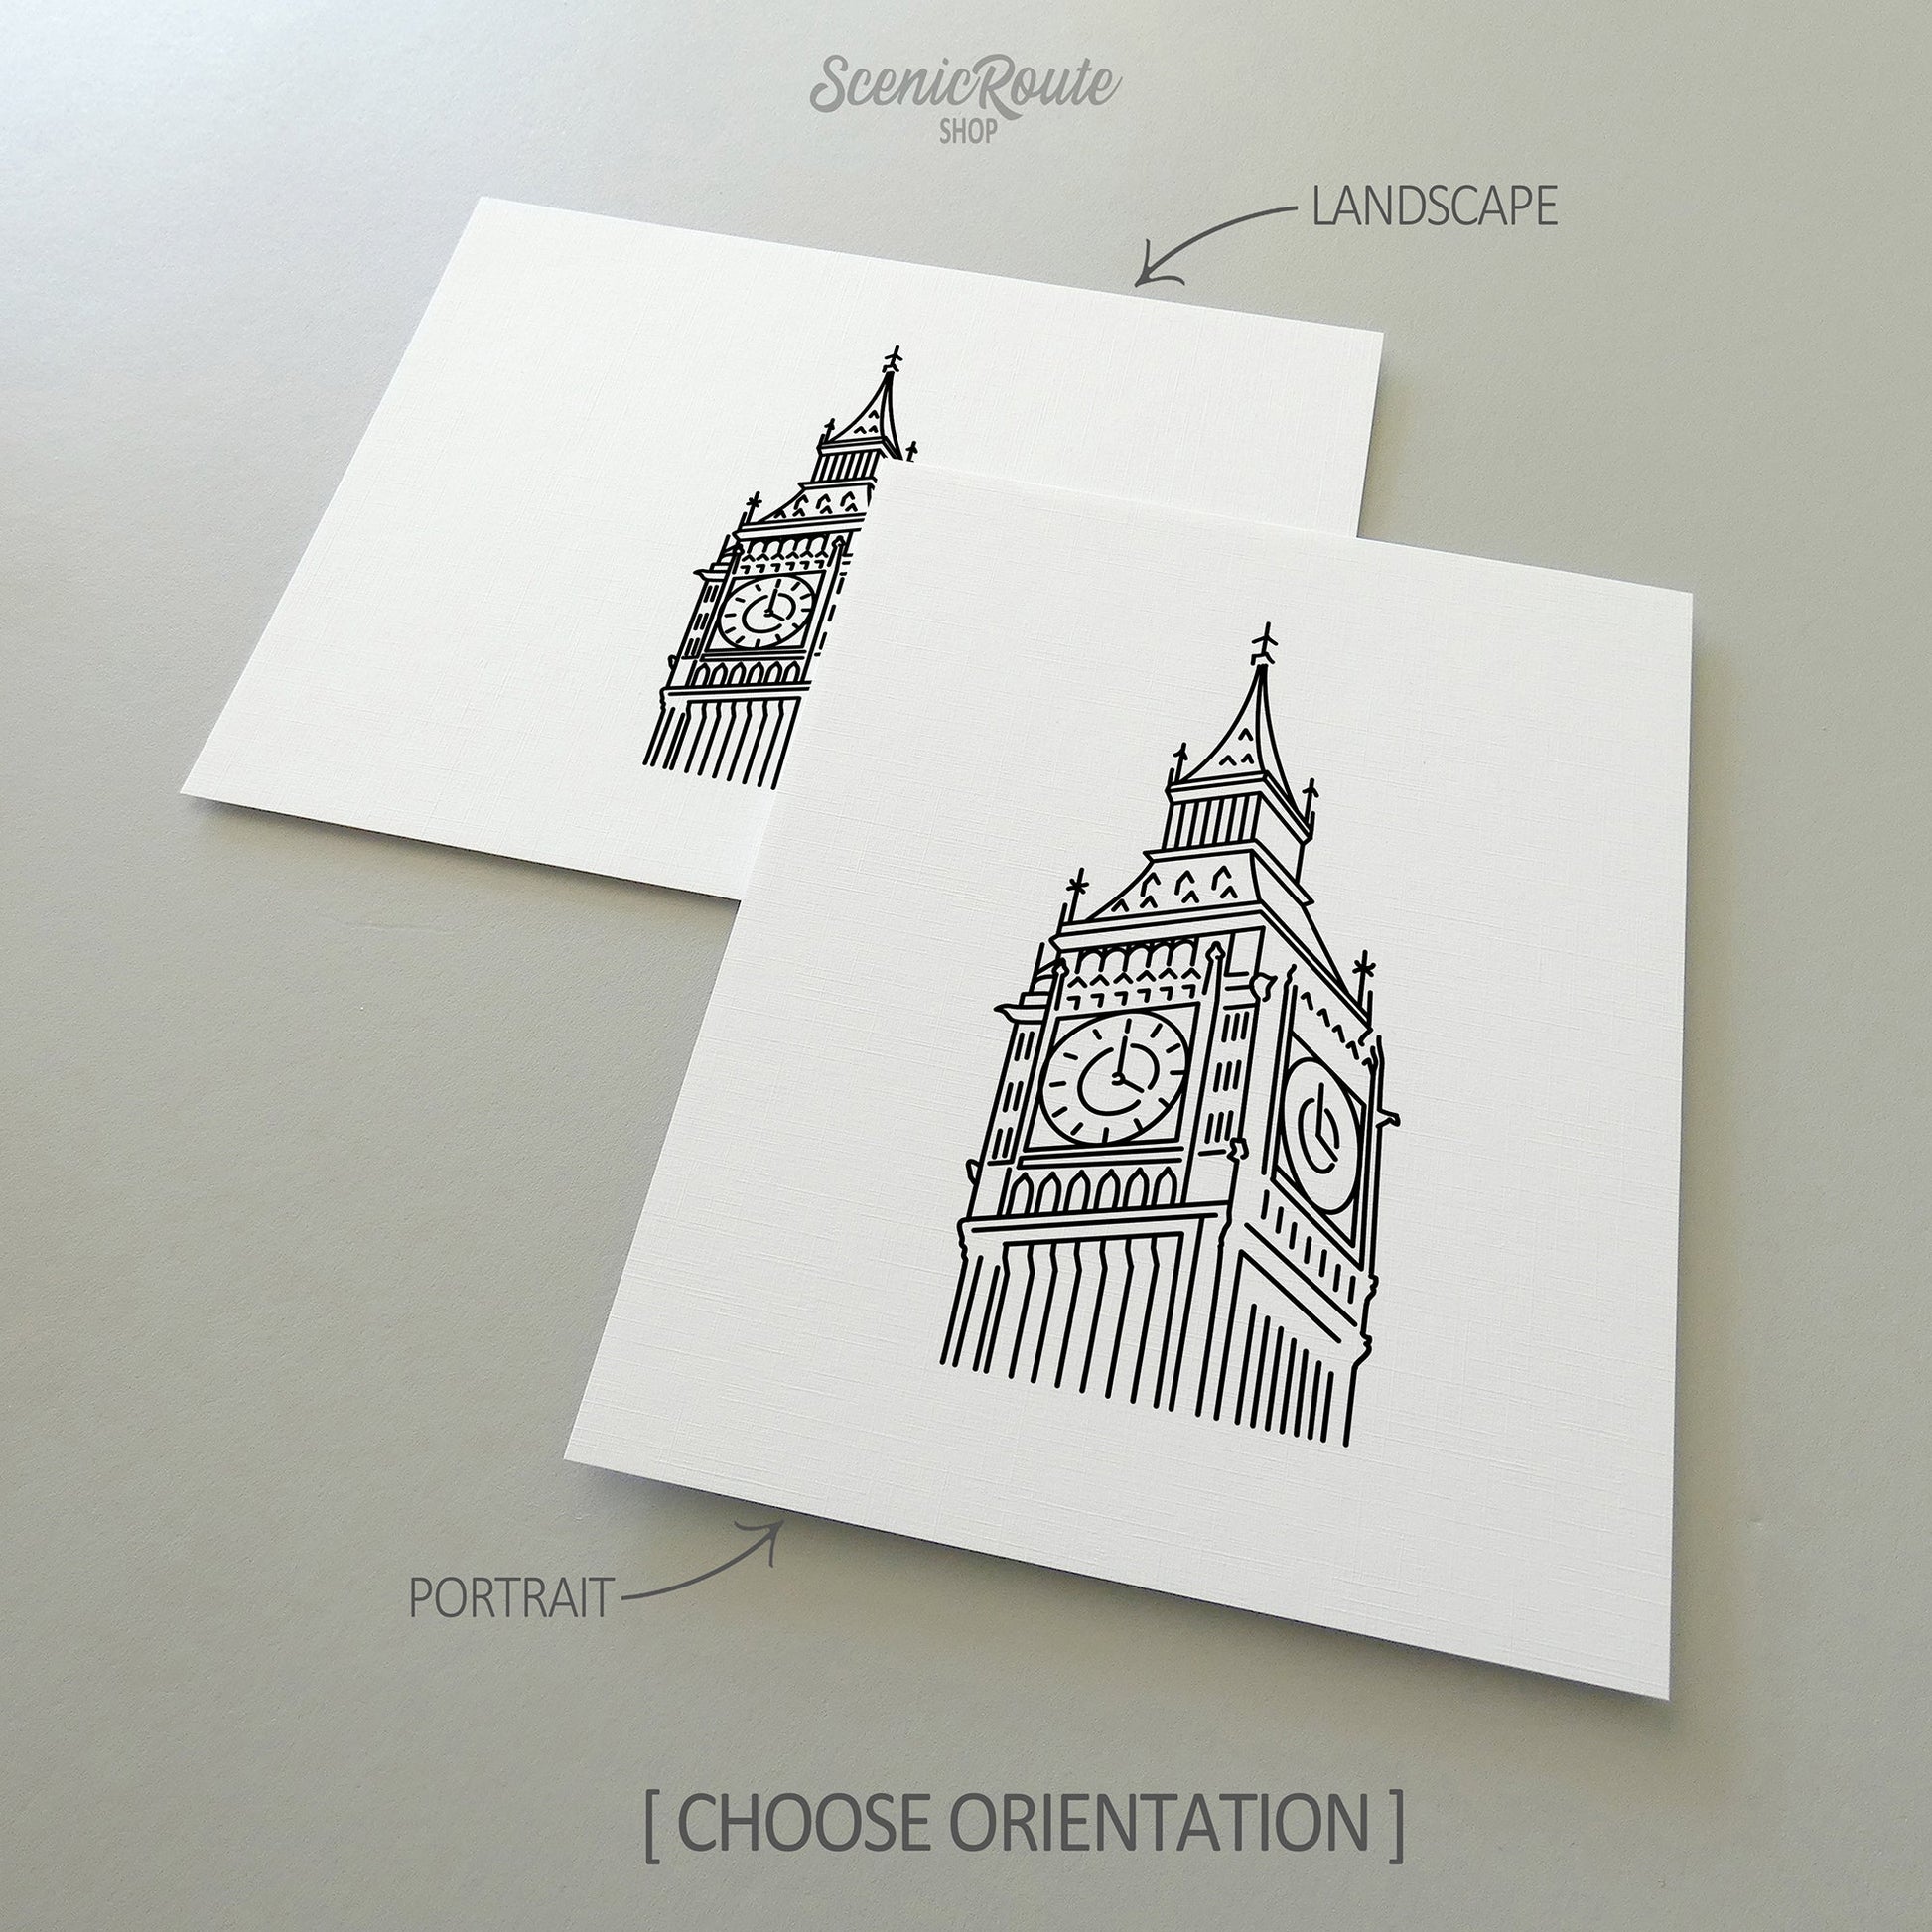 Two line art drawings of Big Ben on white linen paper with a gray background.  The pieces are shown in portrait and landscape orientation for the available art print options.